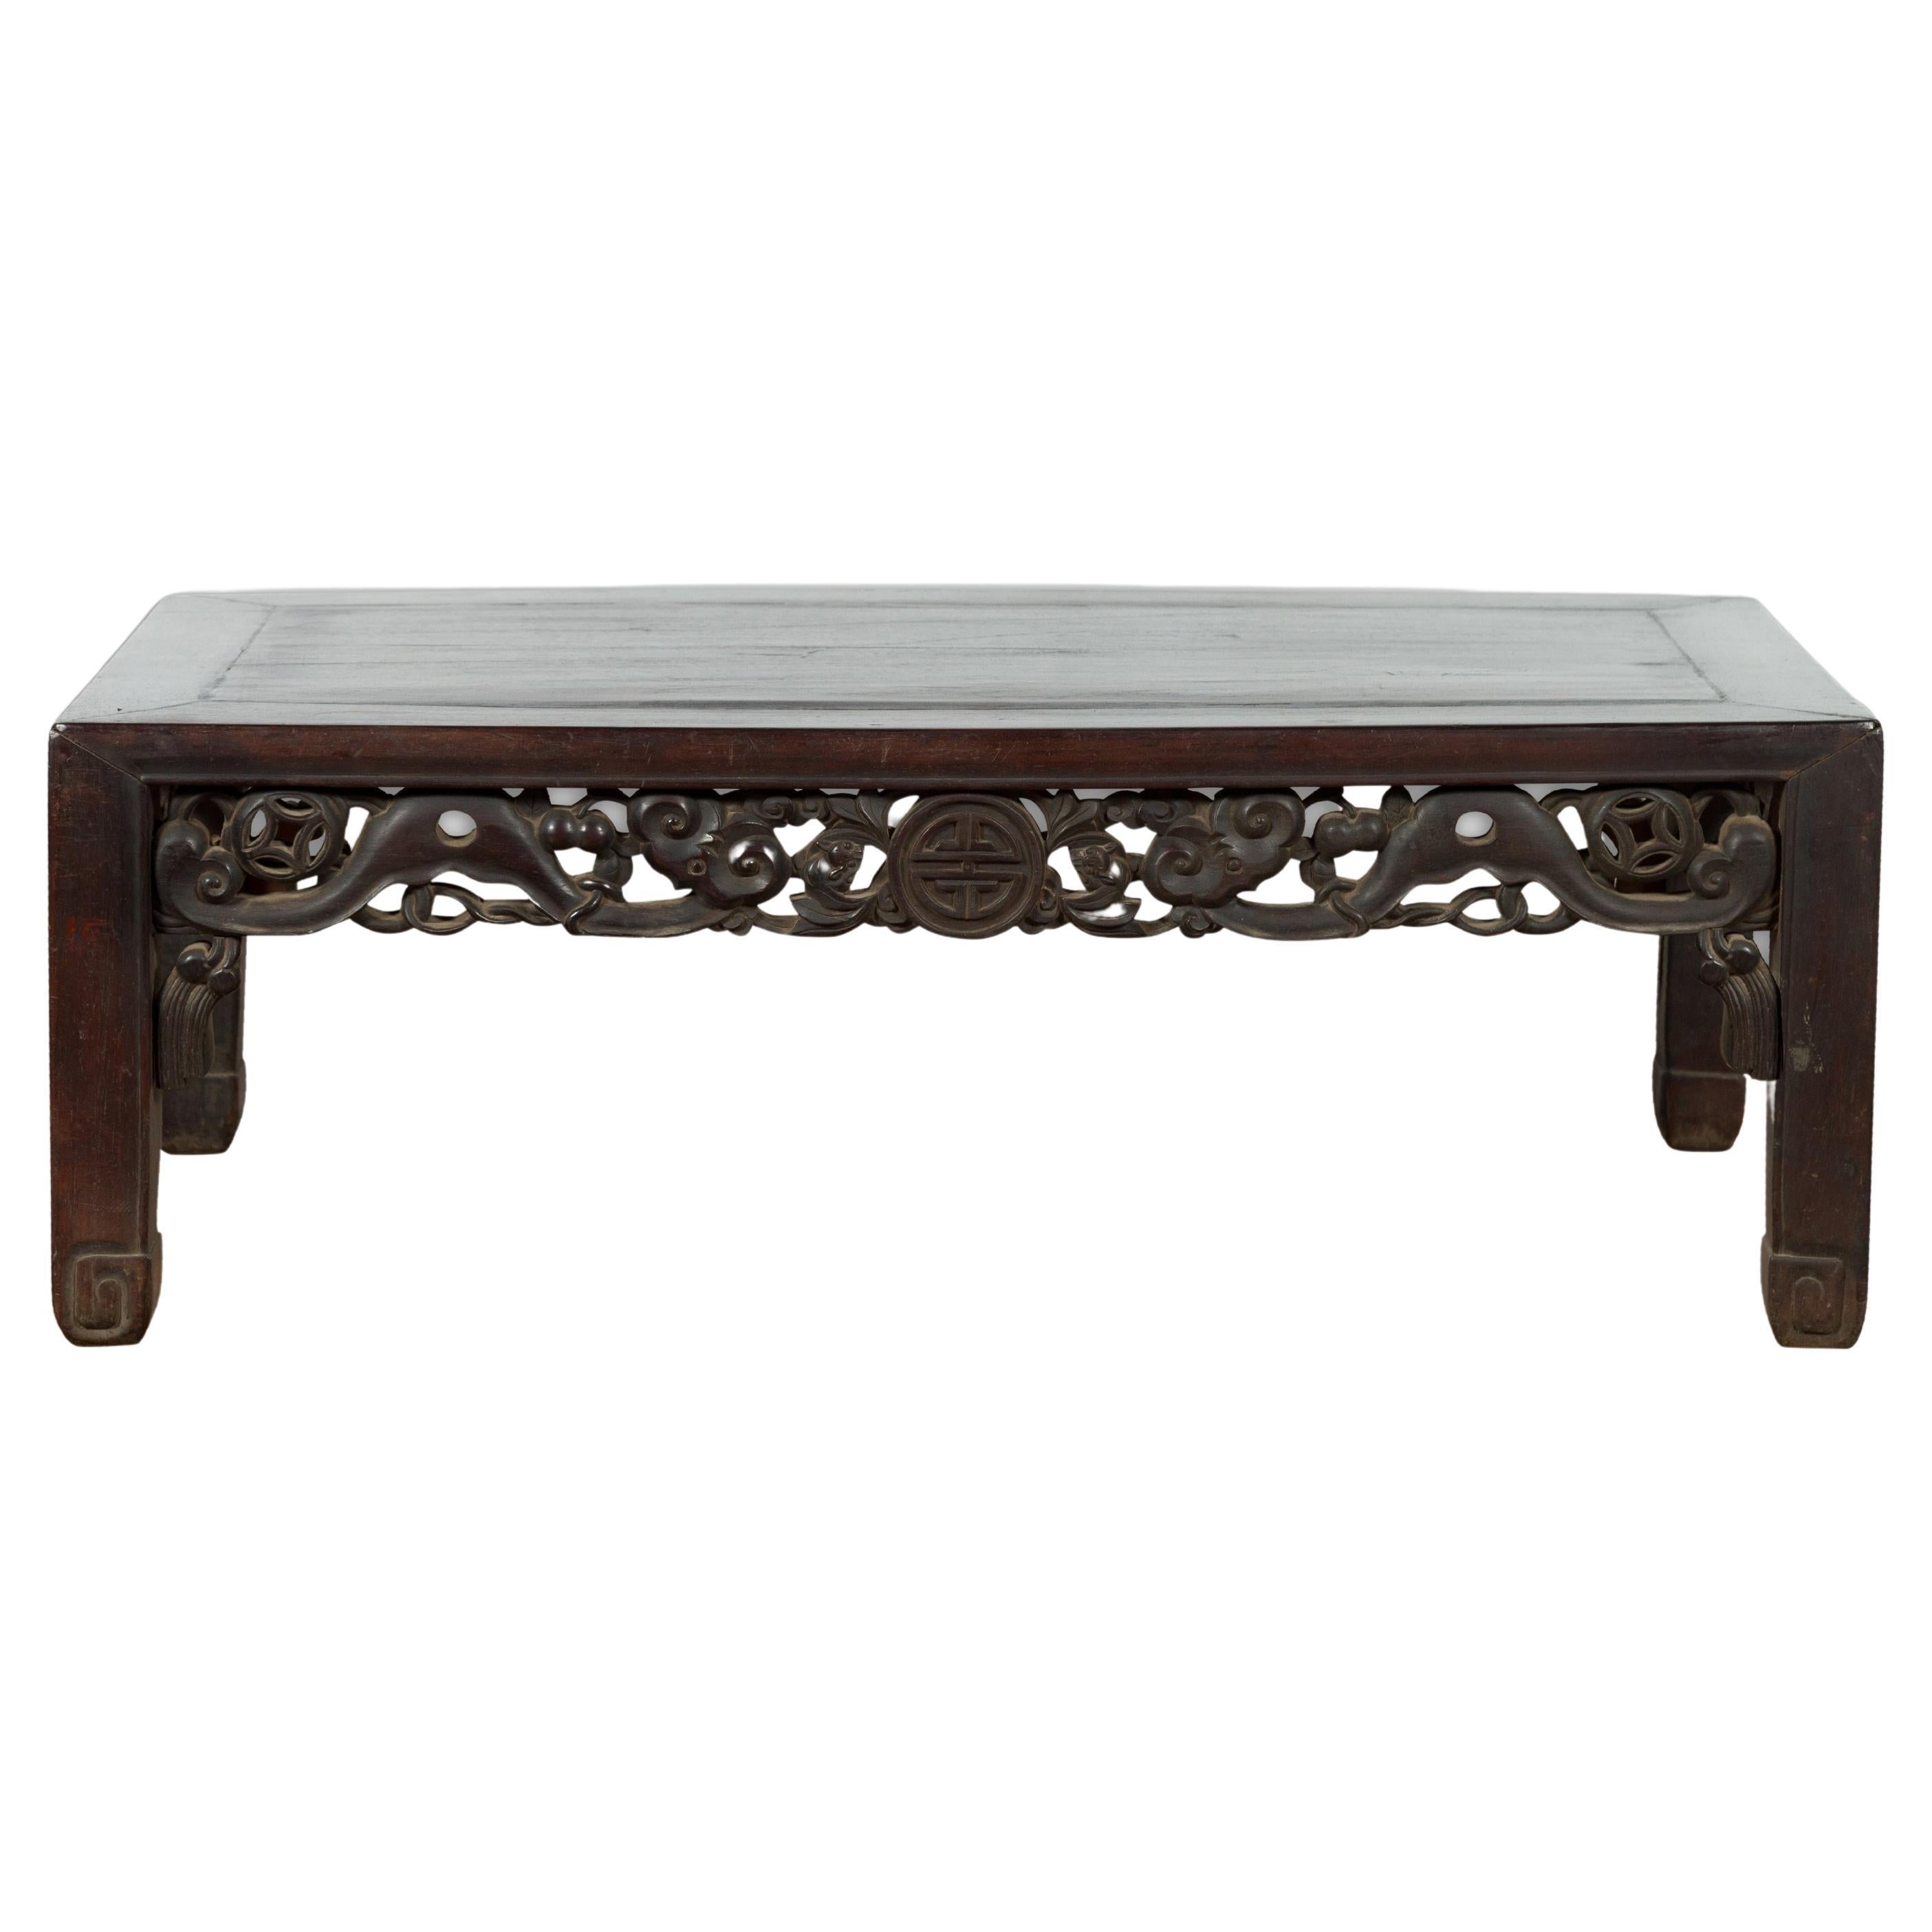 A Chinese Qing Dynasty period coffee table from the 19th century, with carved apron and scrolling feet. Created in China during the Qing Dynasty period, this low table, which could nowadays be used as a coffee table (the Chinese didn't used coffee